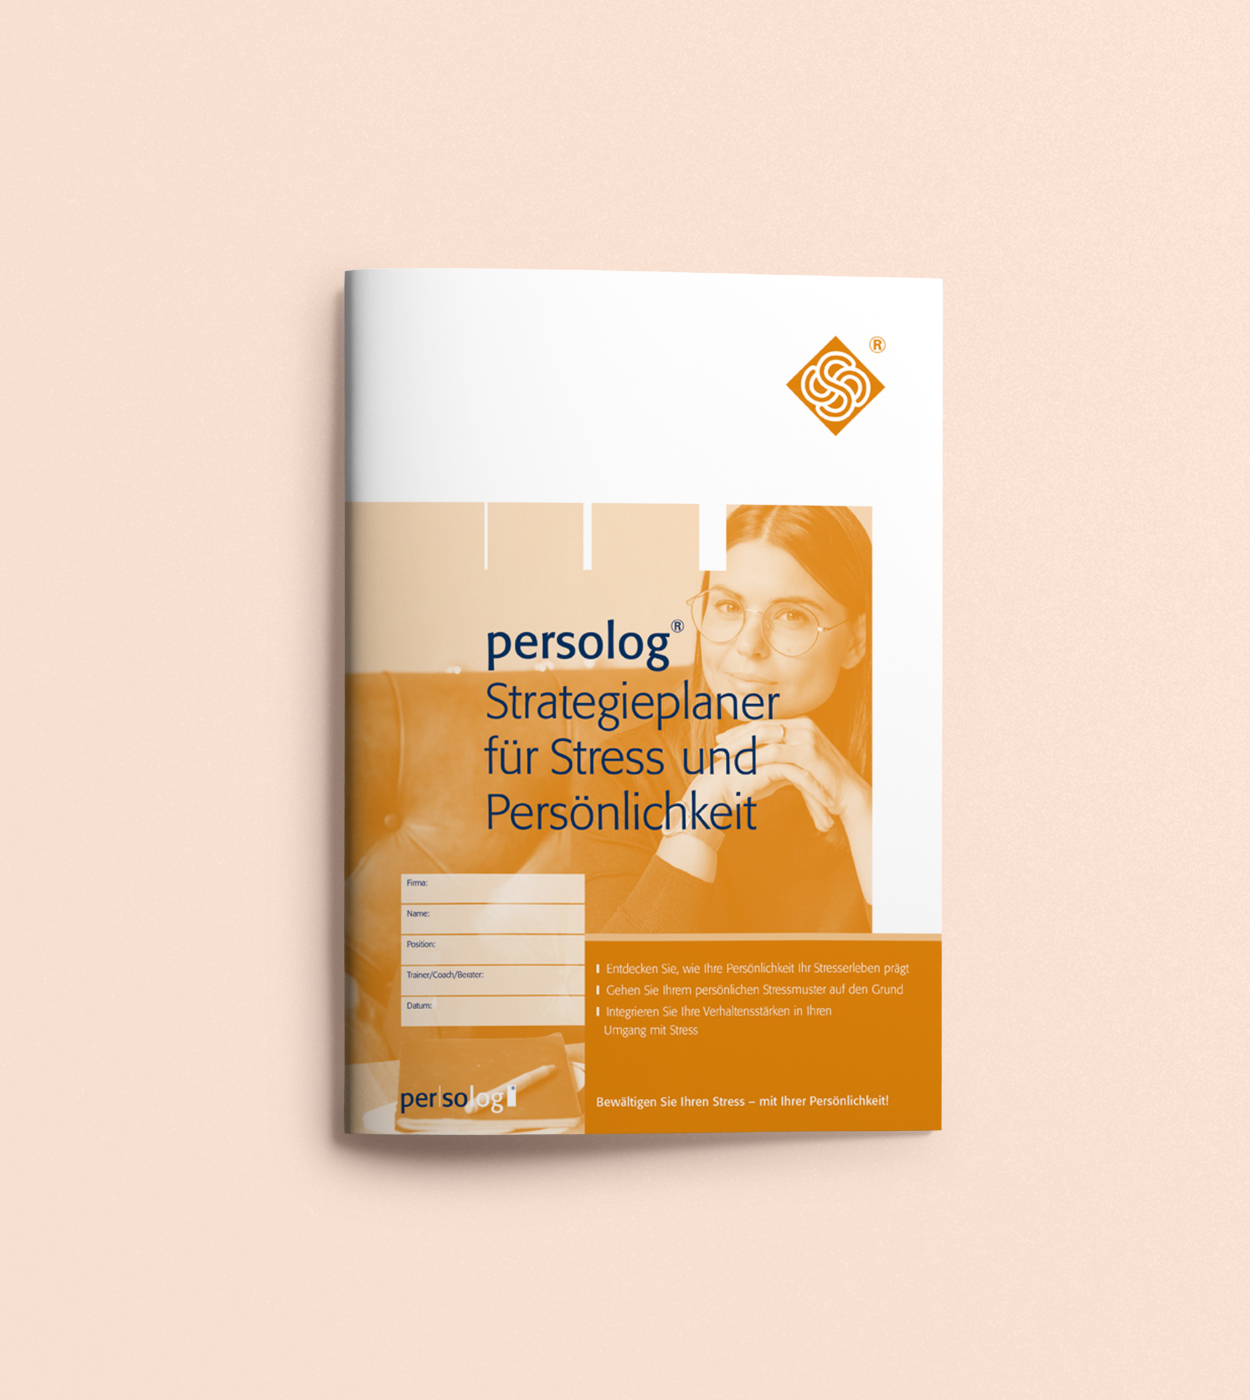 persolog® Strategy Planner for Stress and Personality